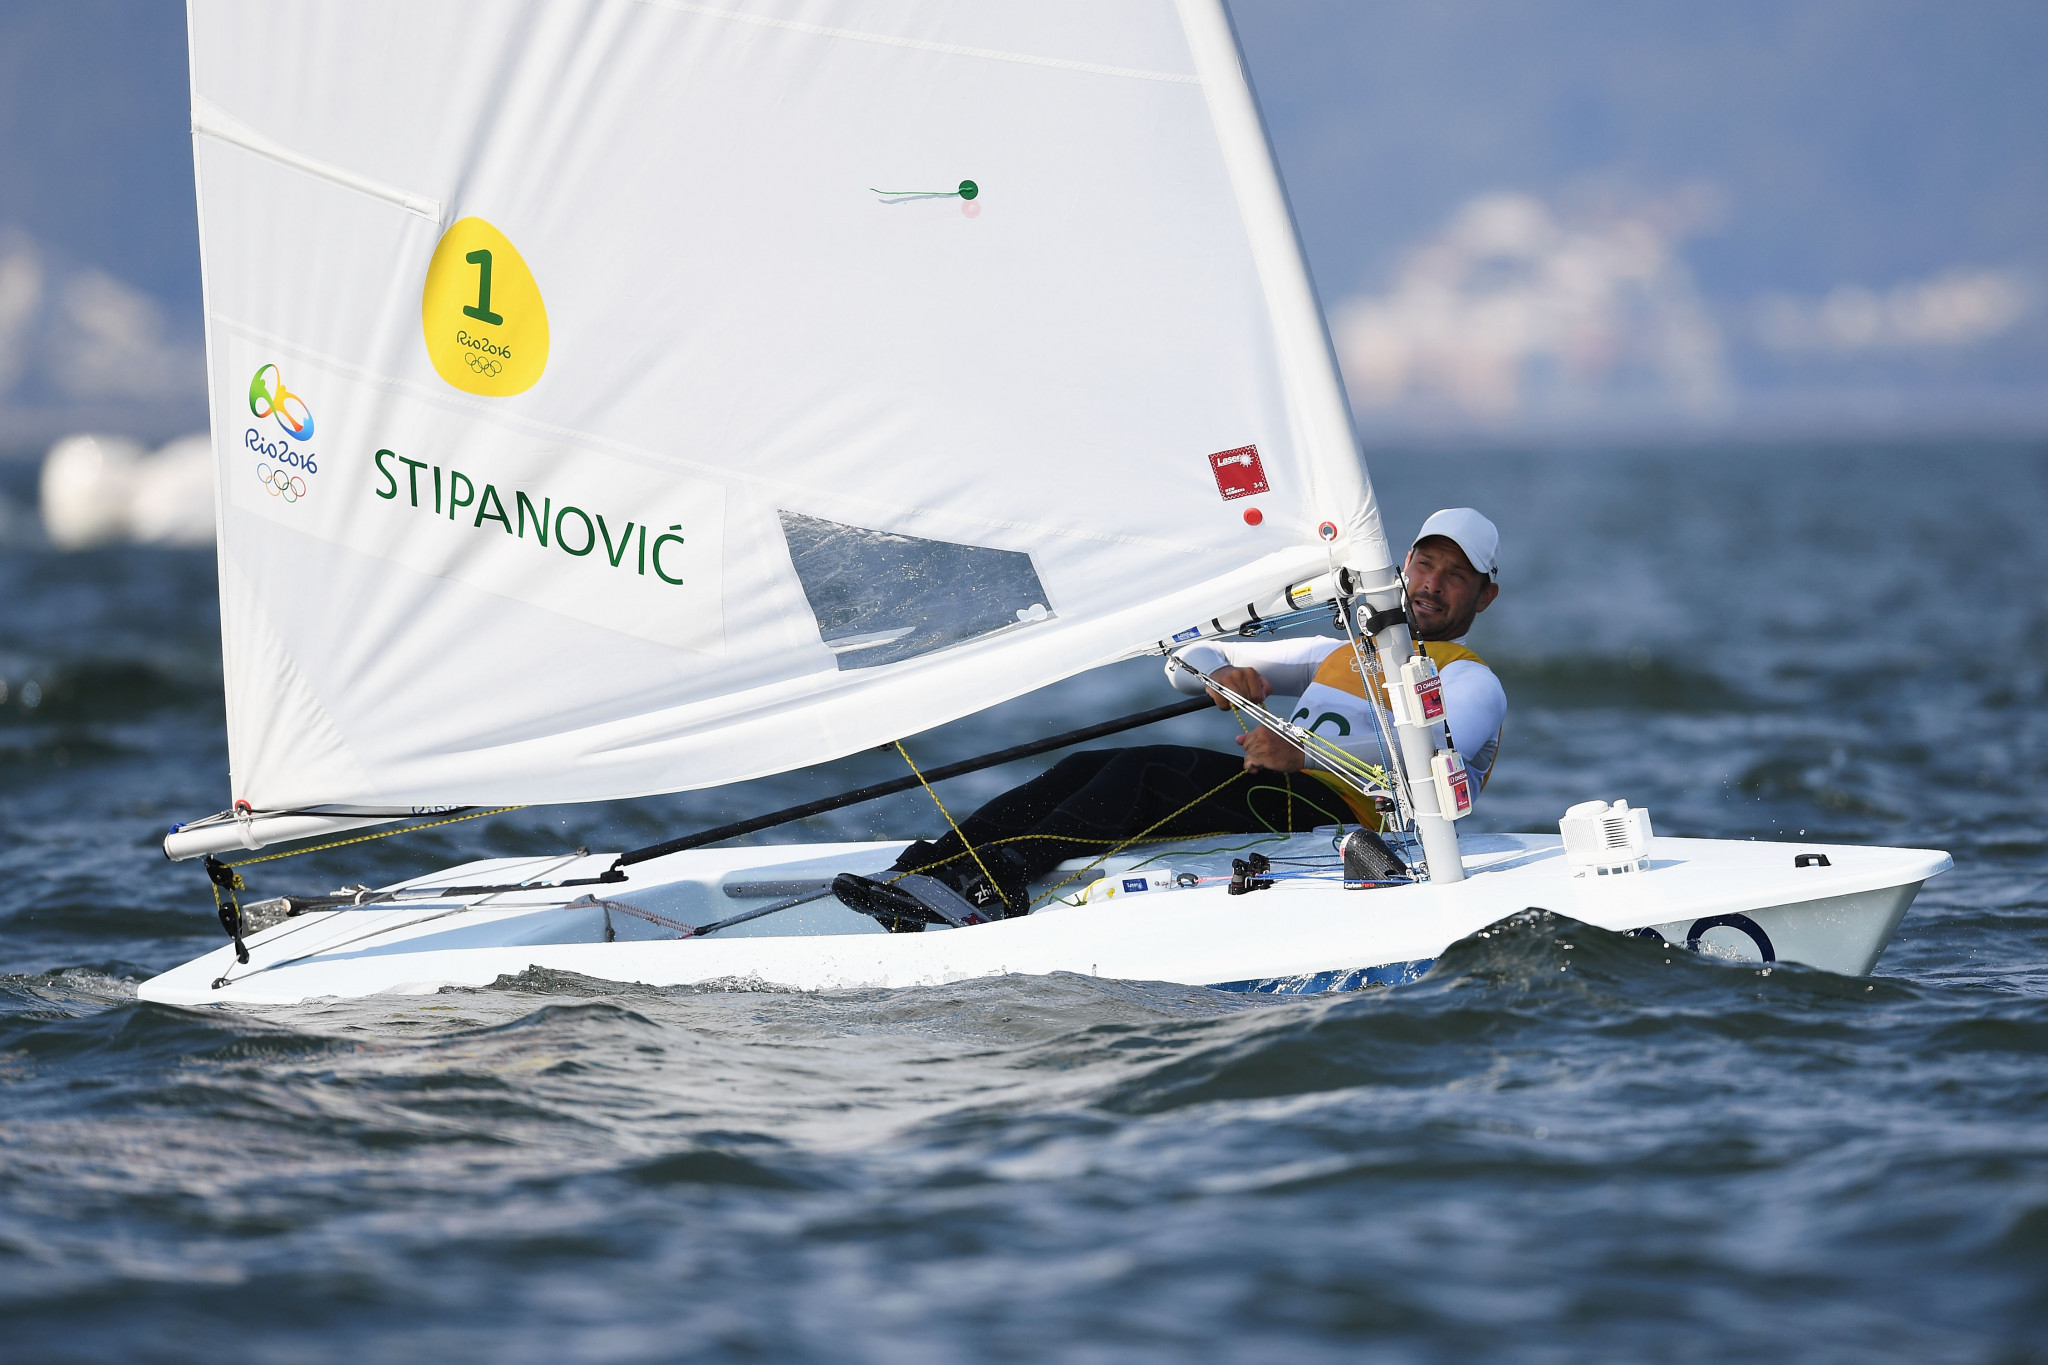 Valencia  to host Paris 2024 sailing equipment trial for one person dinghy events